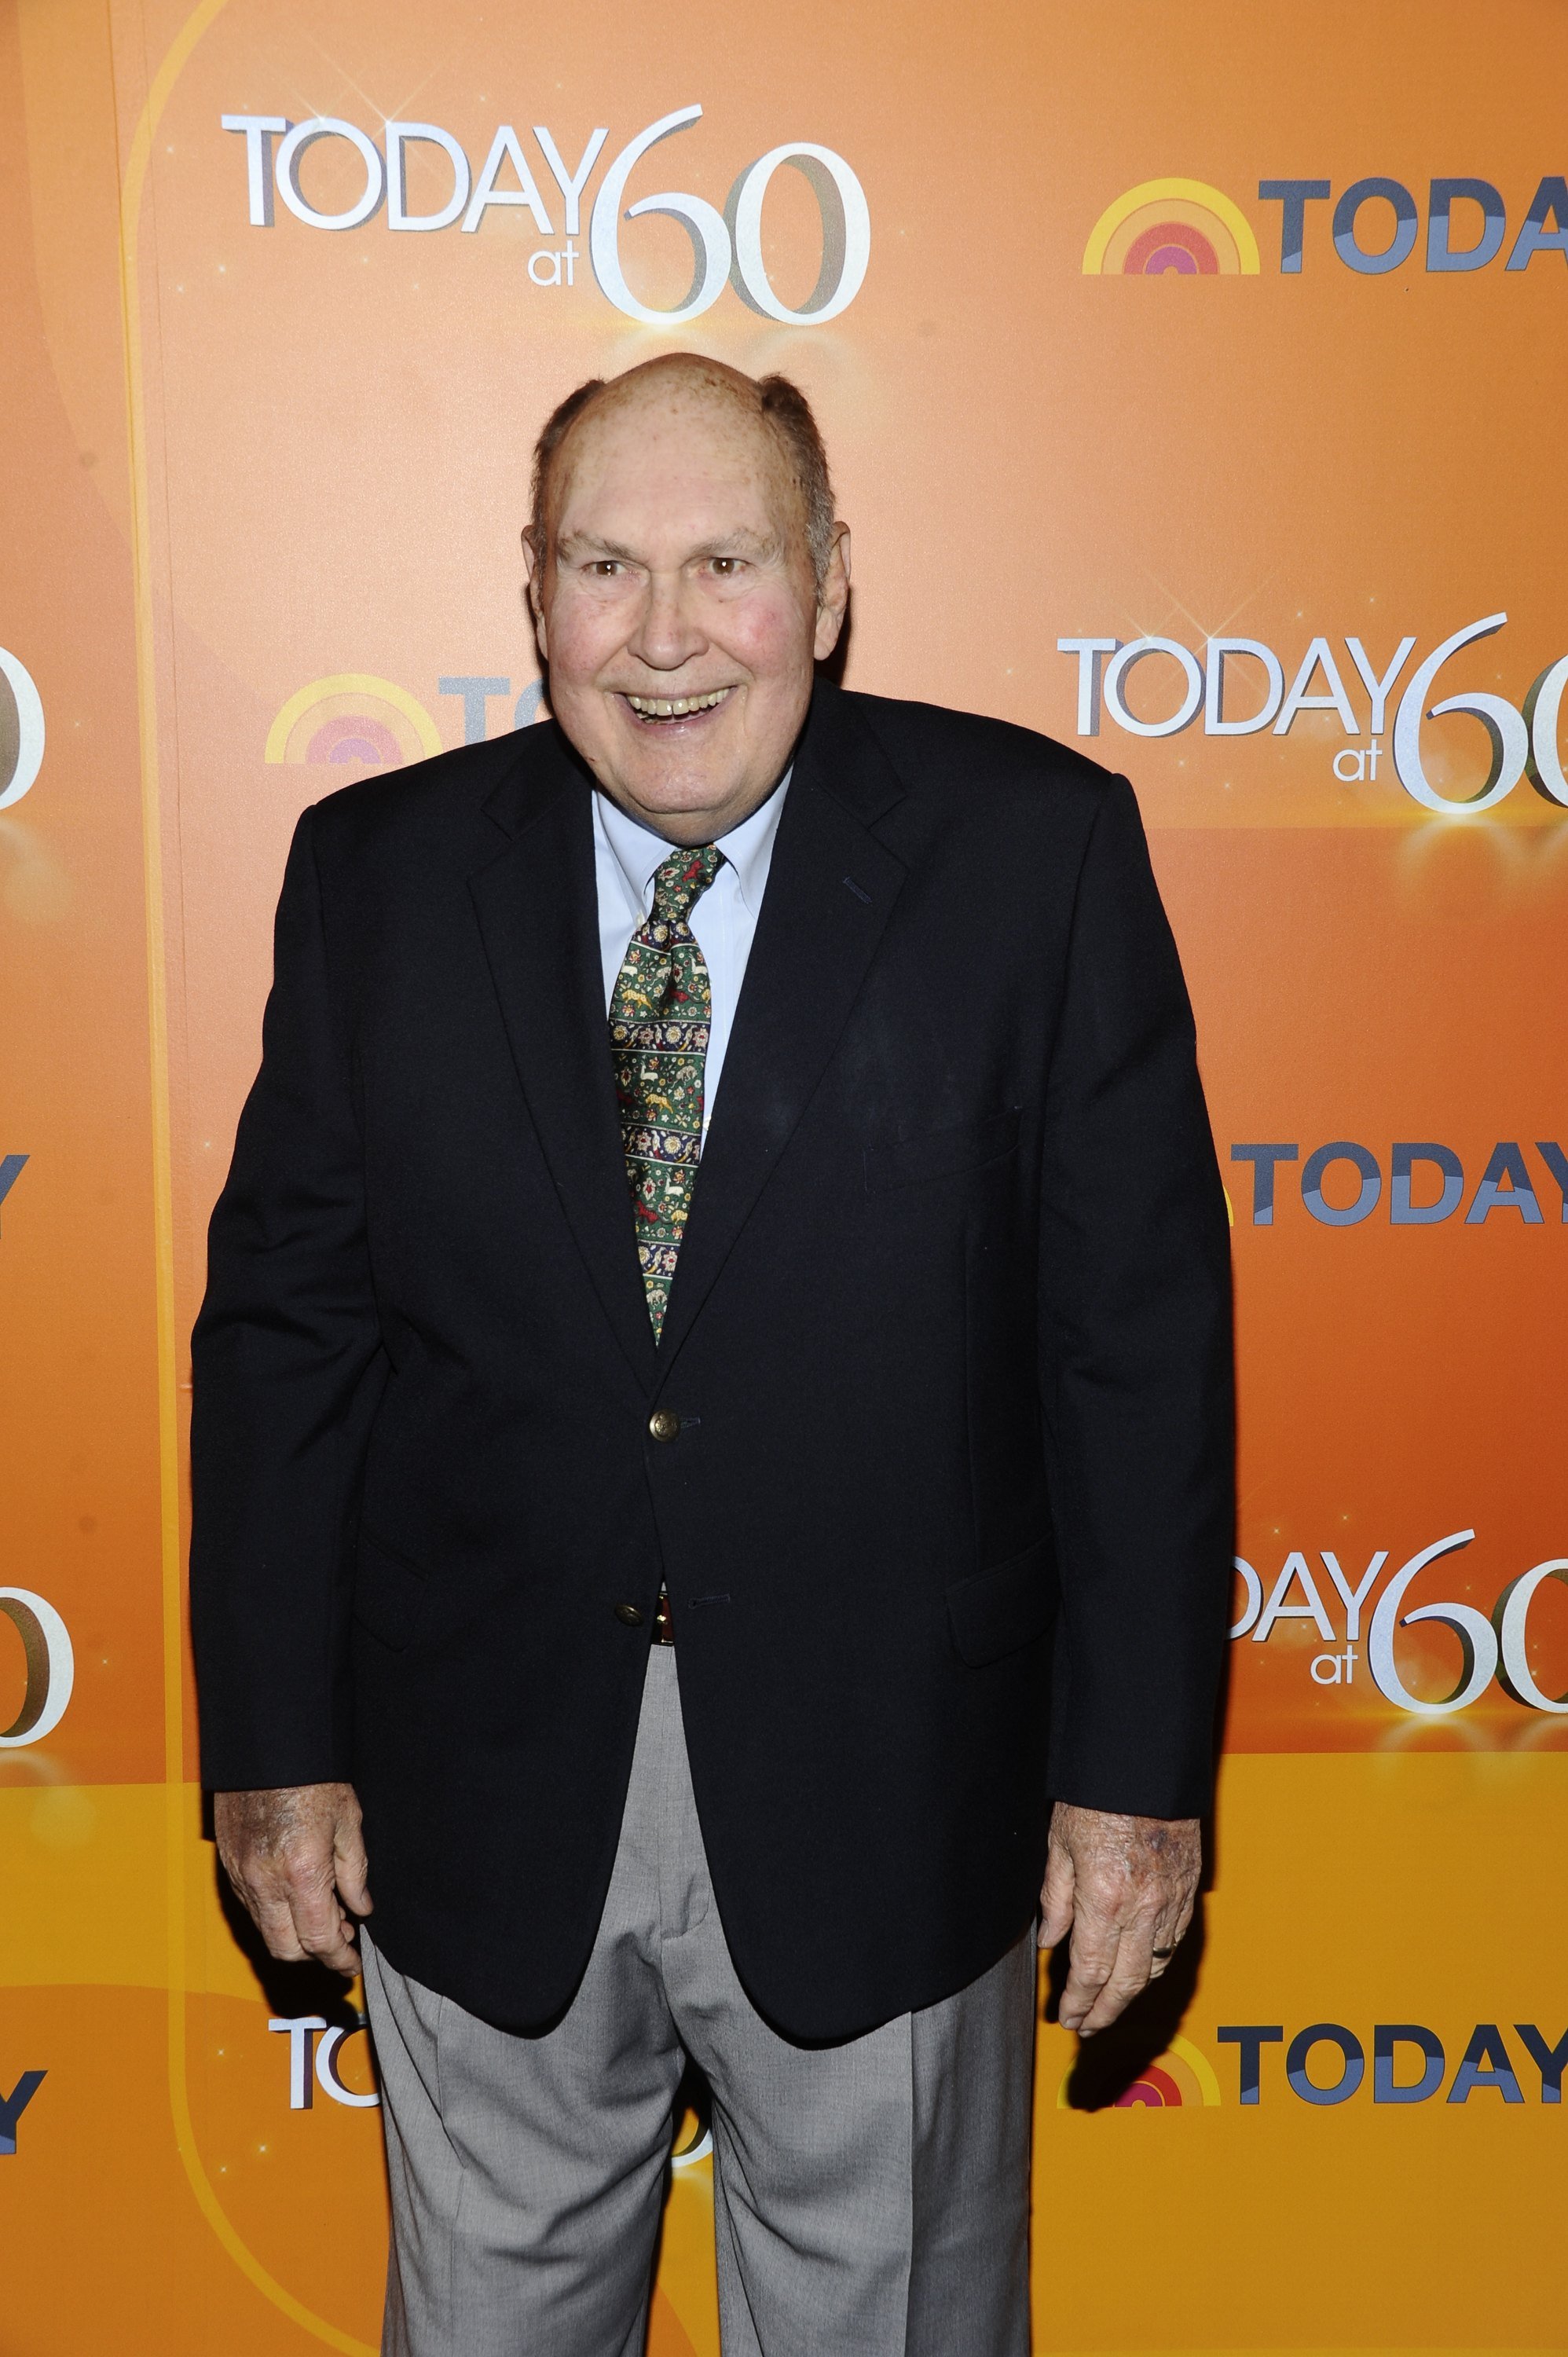 Willard Scott at the Edison Ballroom in New York to celebrate the 60th anniversary of the TODAY show on January 12, 2012 | Photo: GettyImages